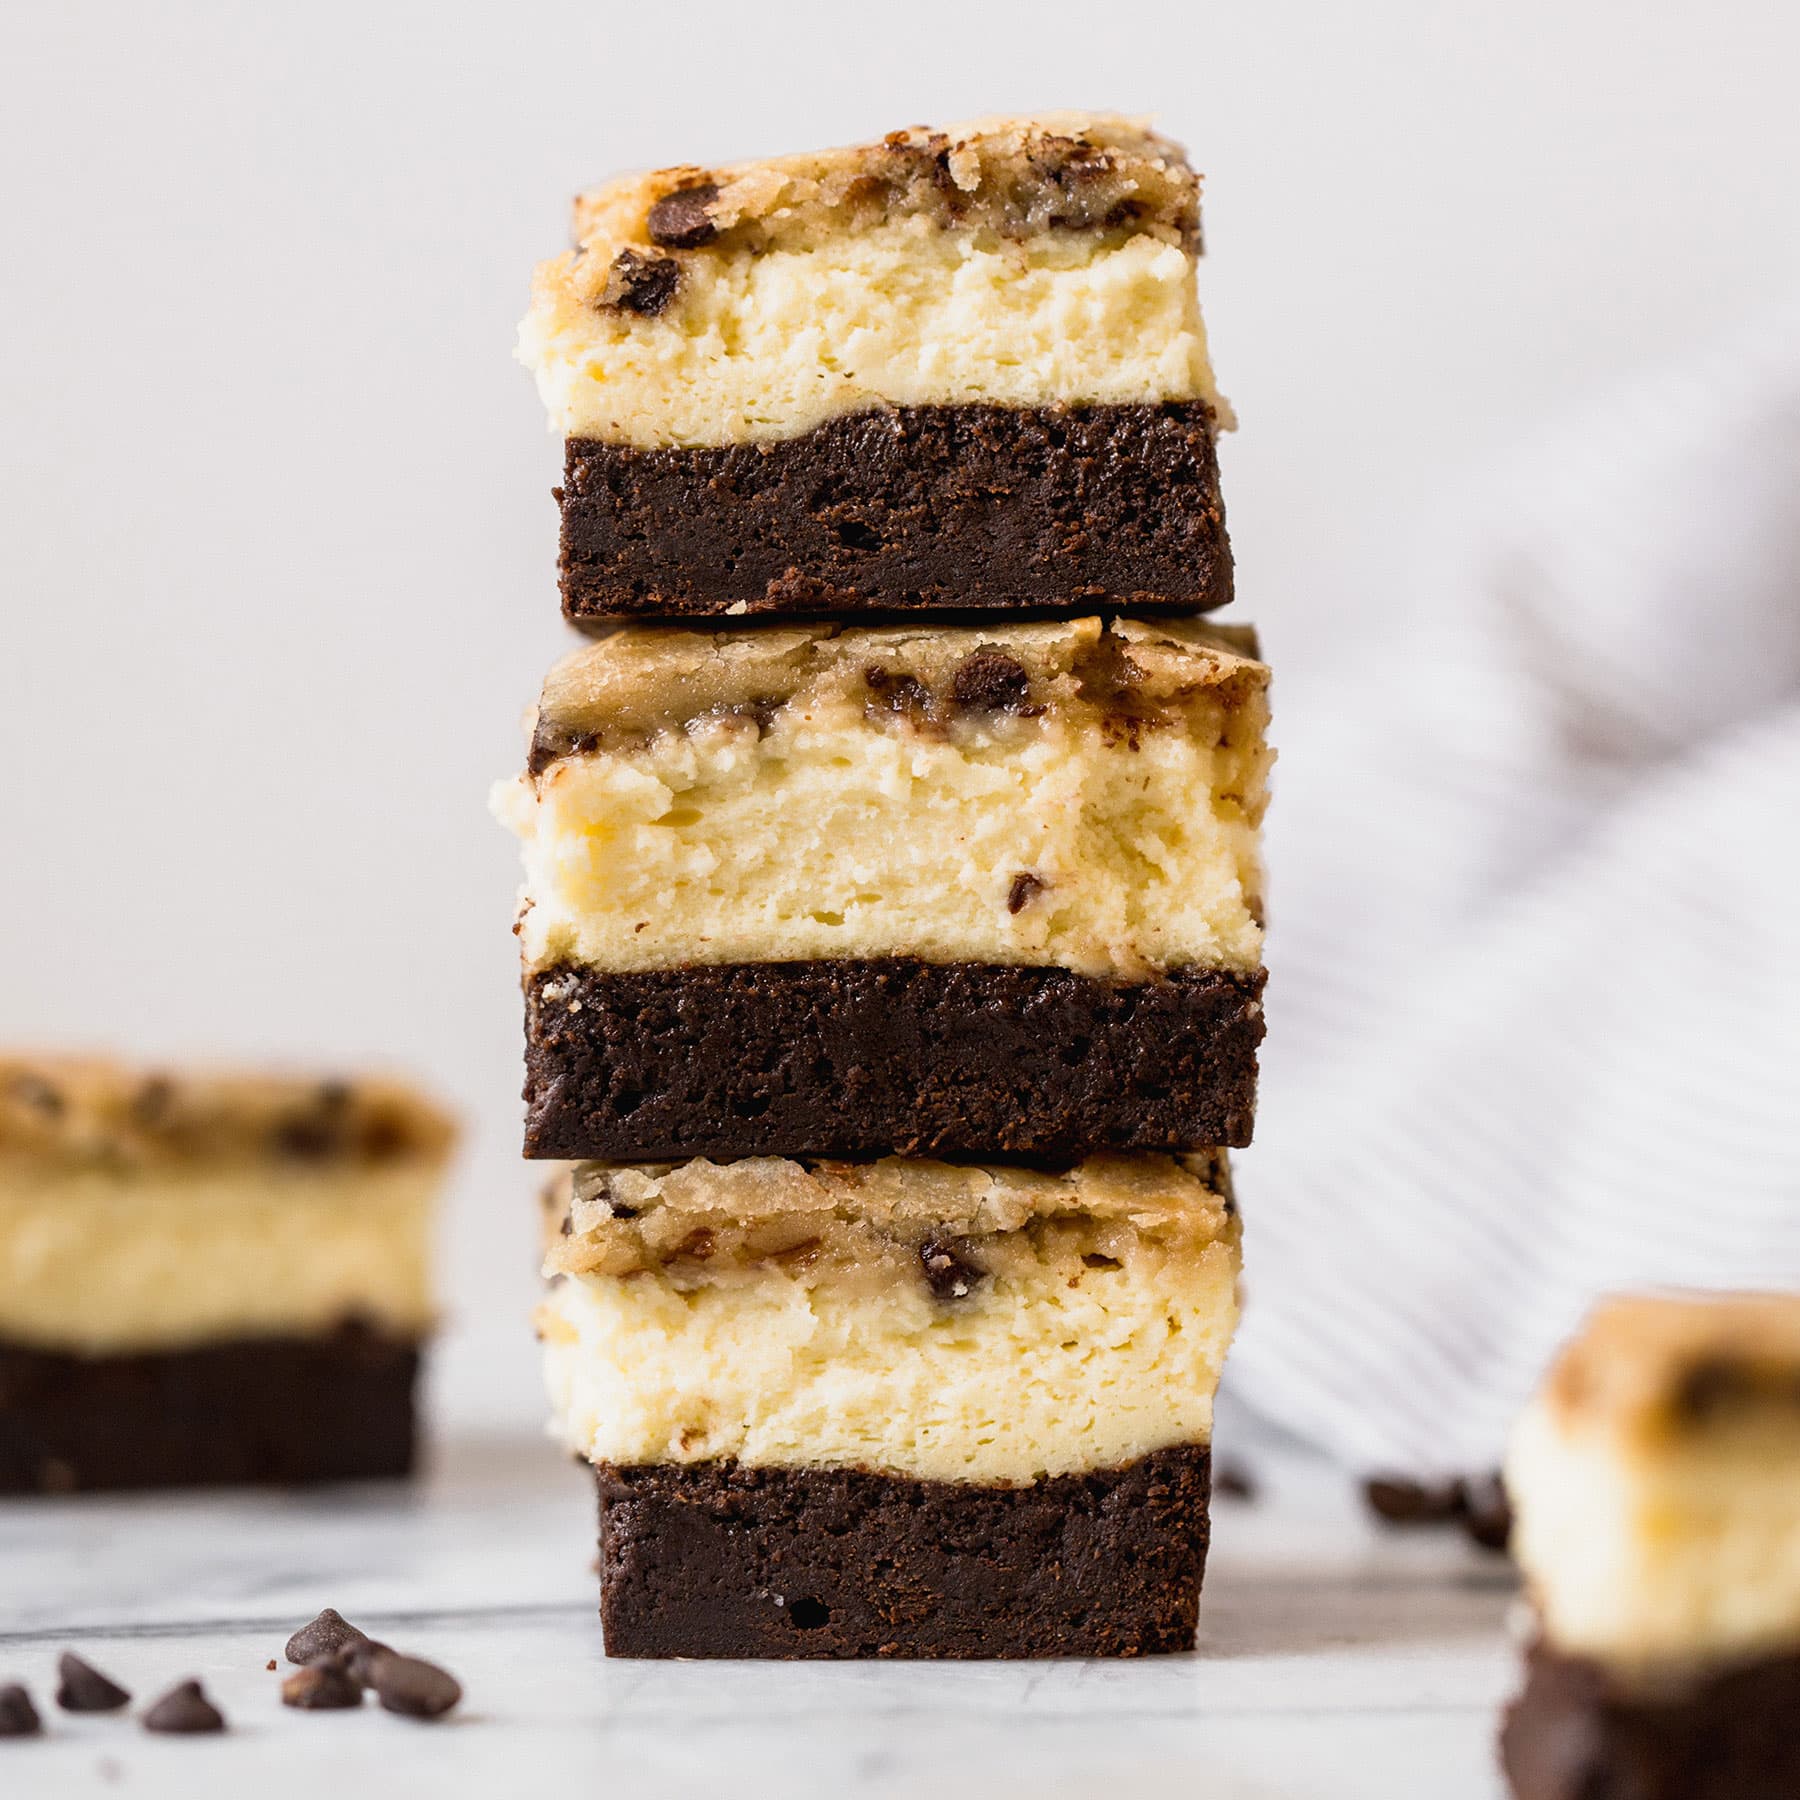 Layer of brownie, layer of cheesecake, and layer of chocolate chip cookie make these brownies absolutely sinful!